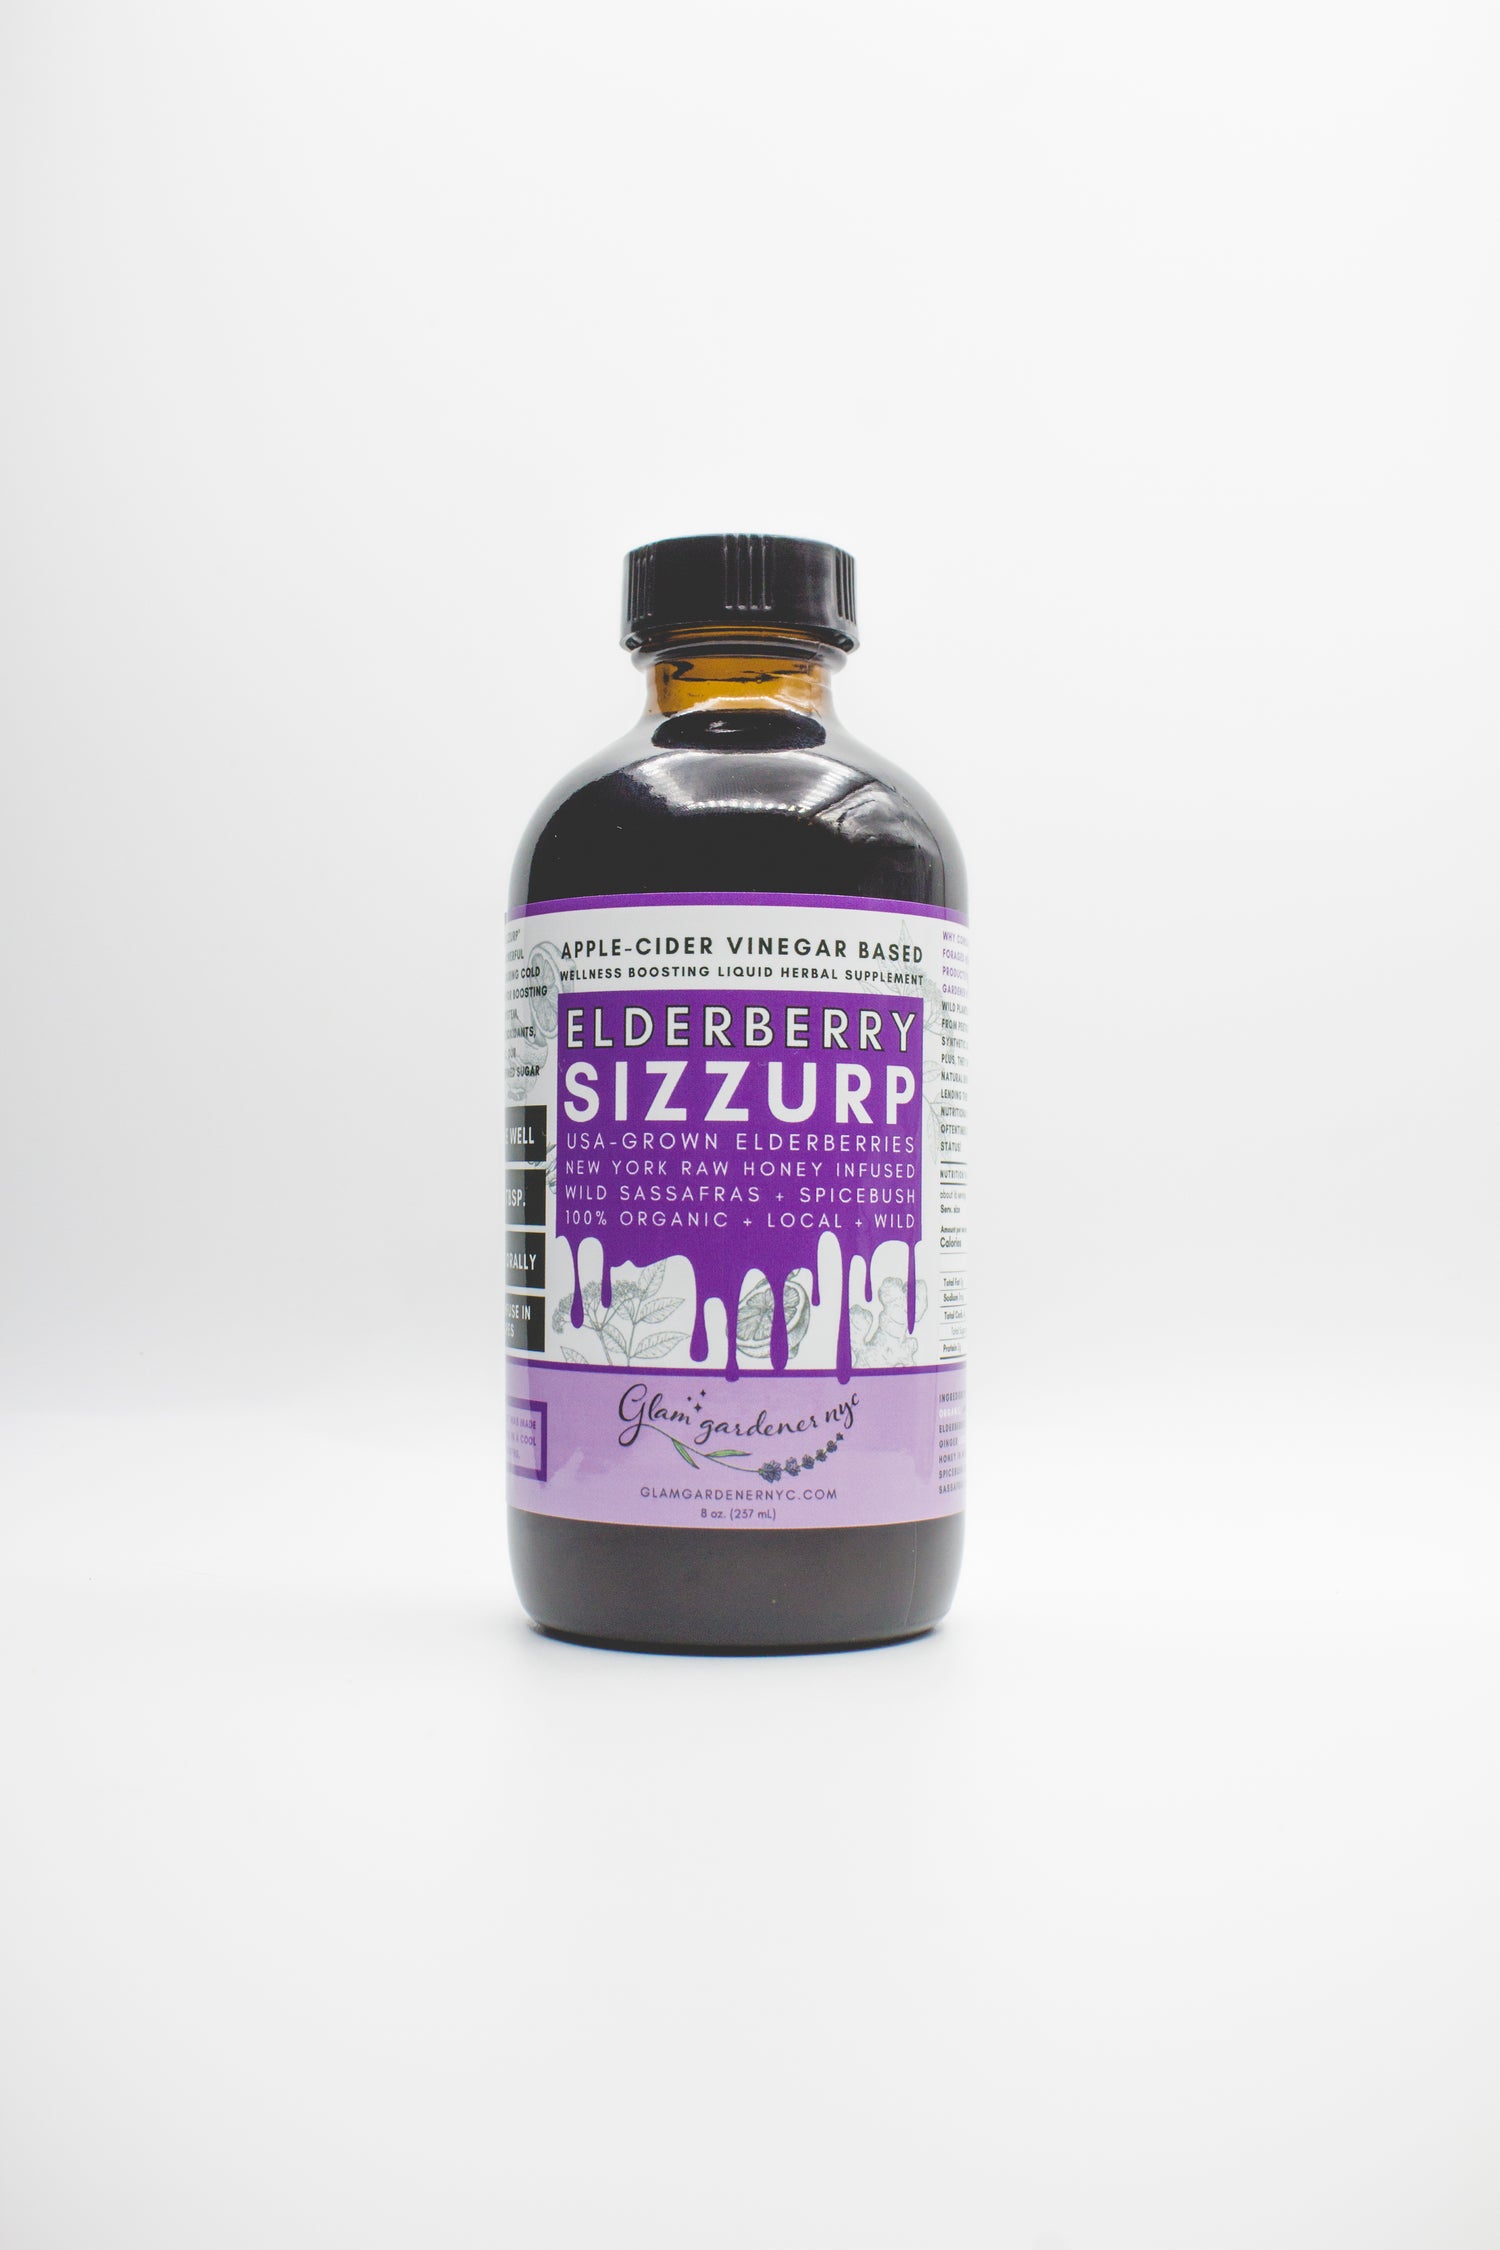 elderberry sizzurp (syrup) by glam gardener nyc organic local honey and wild plants new york state grown